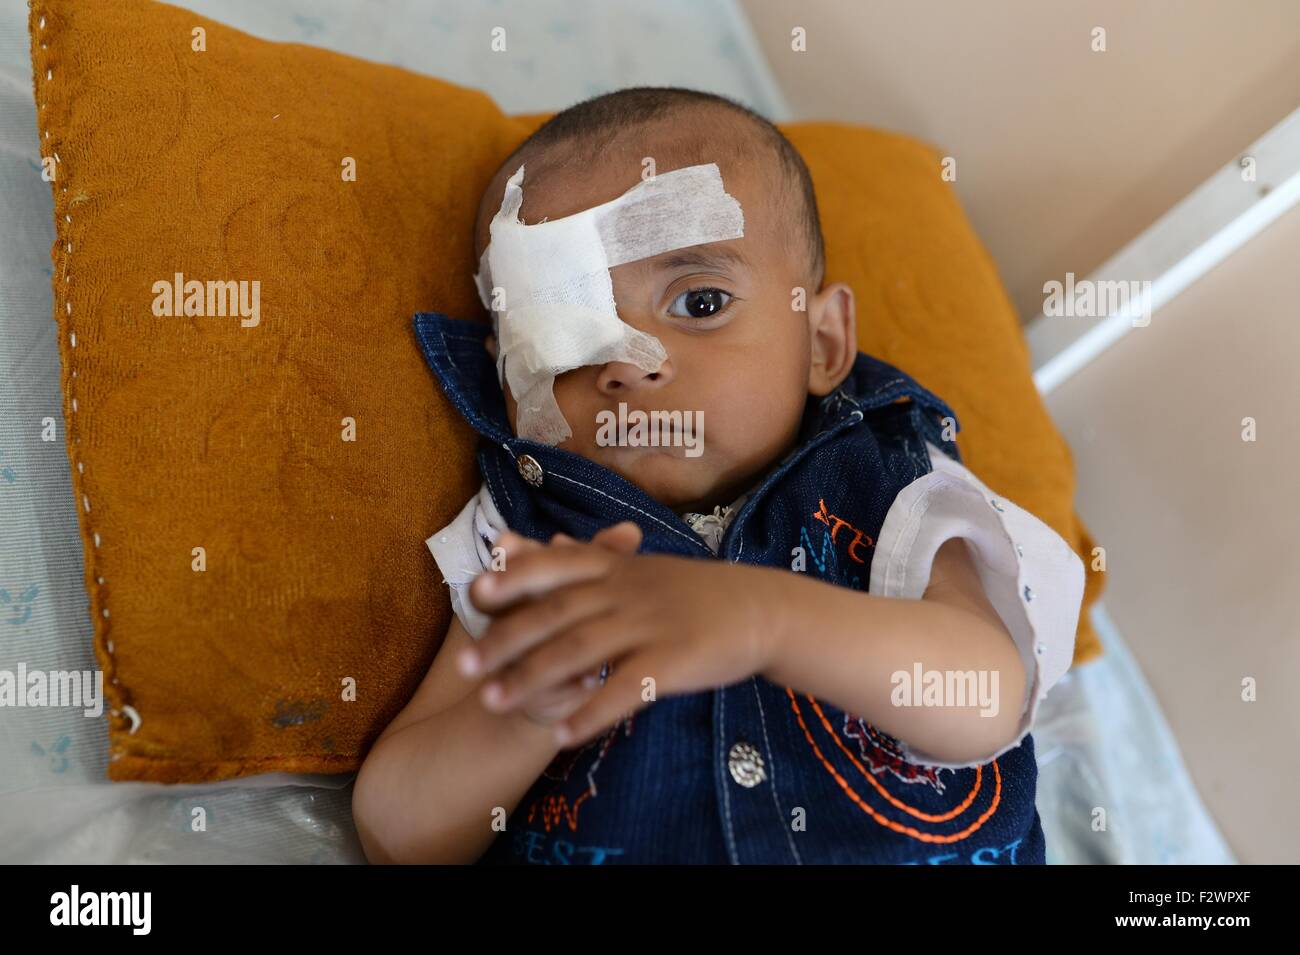 Kabul, Afghanistan. 06th Aug, 2015. The eleven-month-old son of farmer Ahmad Zai lies on a bed at the Mirwais hospital run by the Red Cross in Kabul, Afghanistan, 06 August 2015. A shrapnel had entered the brain of the boy through one of his eyes. Around 250,000 people received medical treatment at Mirwais hospital in 2014. Photo: Subel Bhandari/dpa/Alamy Live News Stock Photo